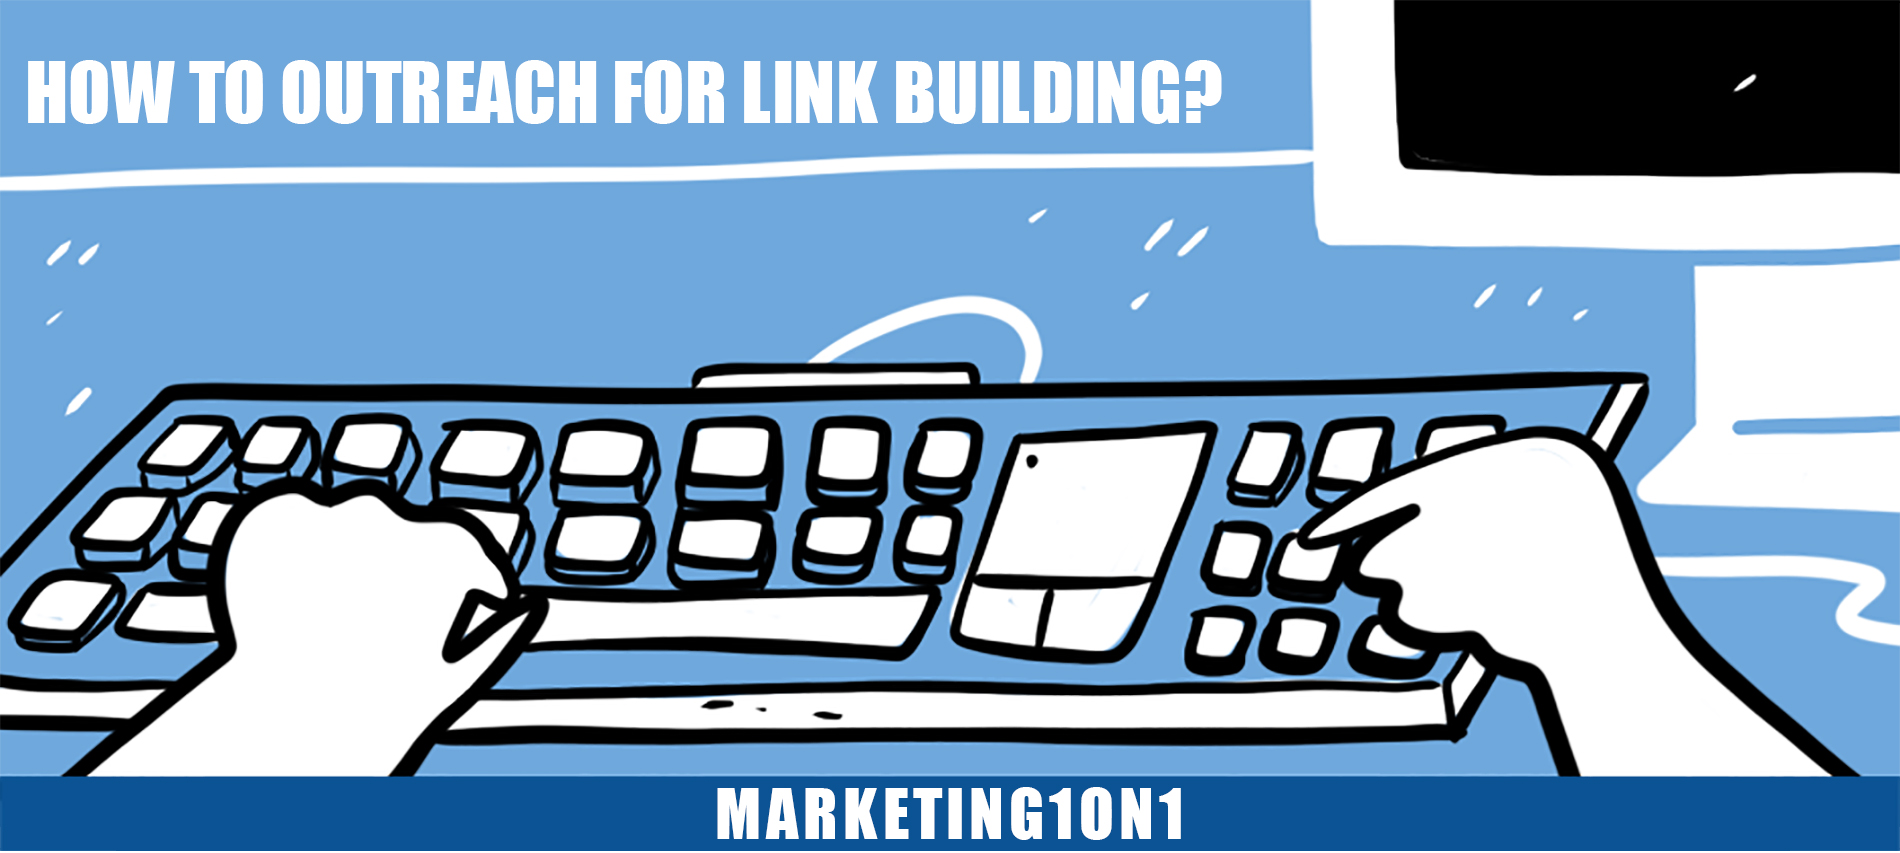 How to outreach for link building?